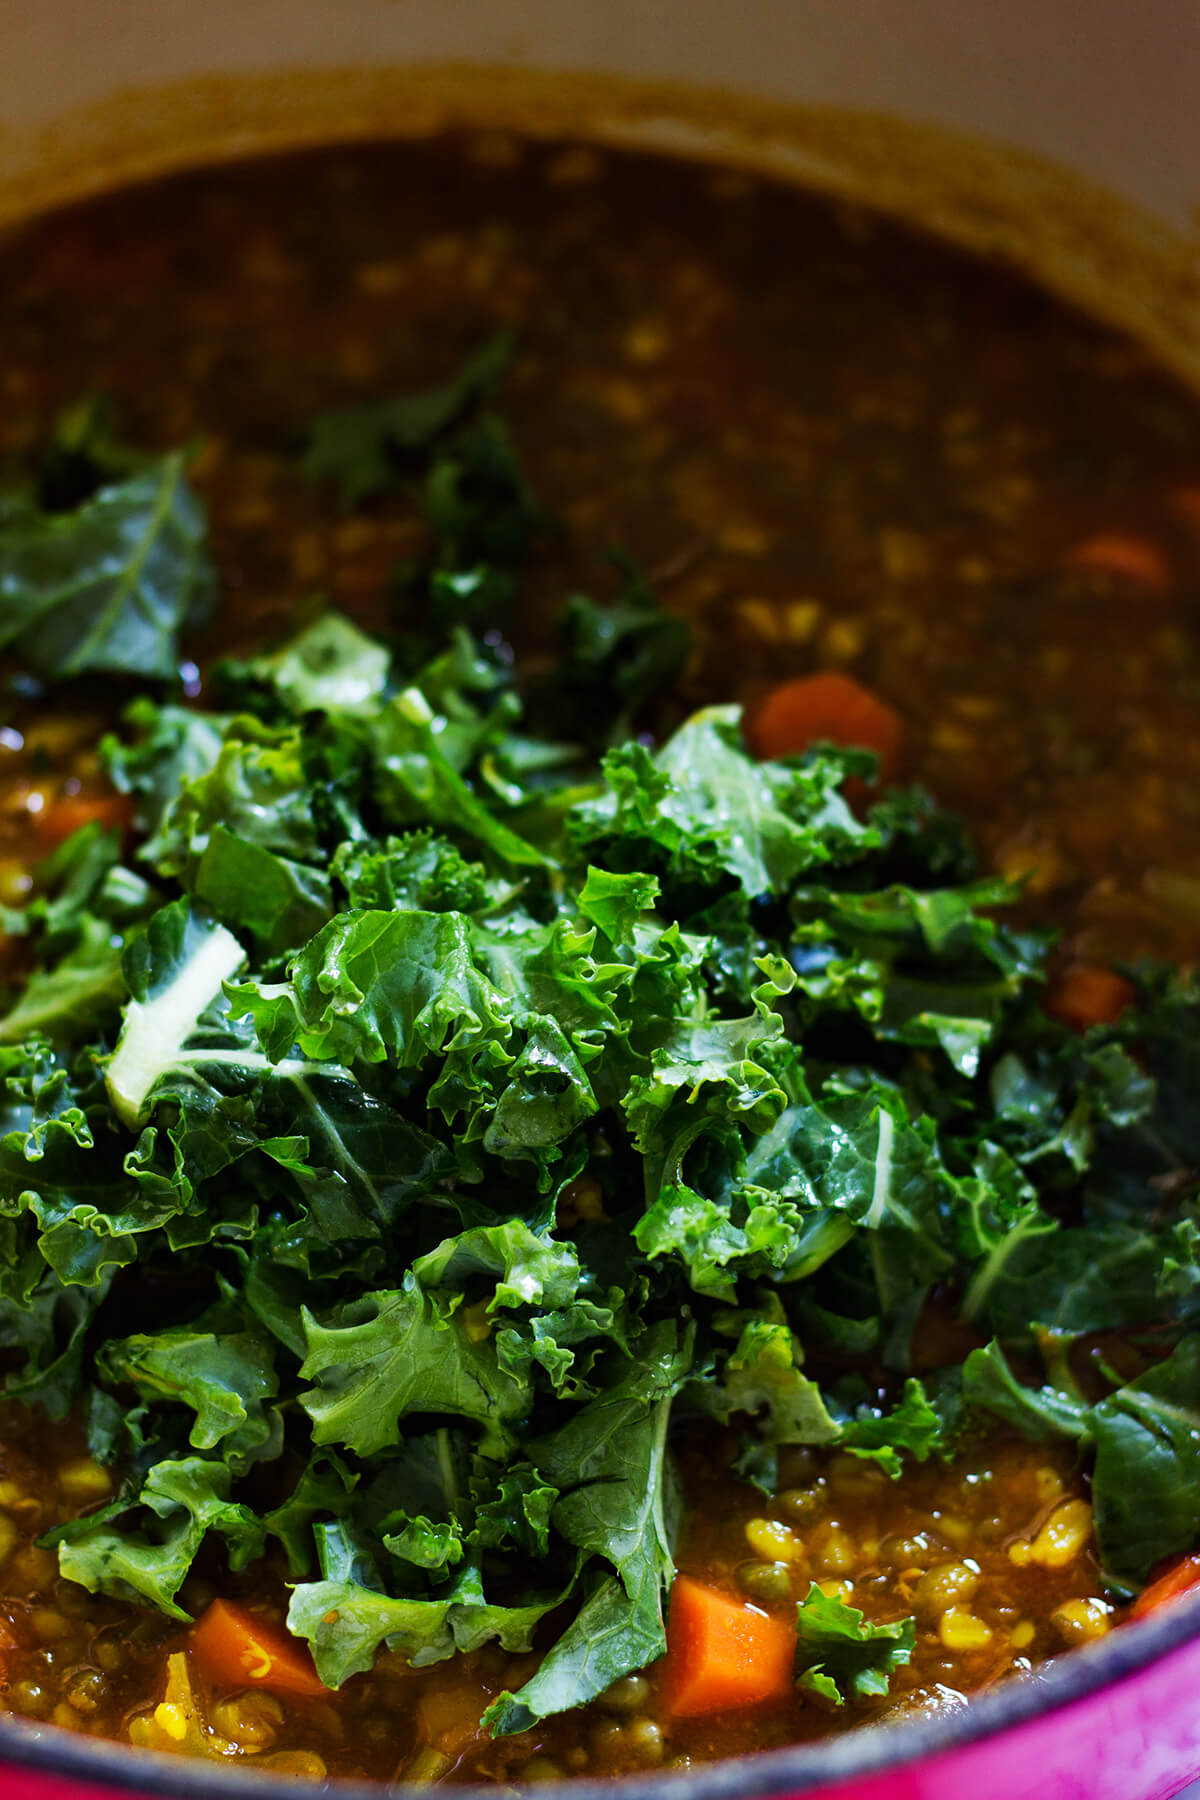 This mung bean soup hits every note for a perfect meal- it is warming and filling, creamy and chunky, spiced but not spicy. It just makes sense once you try it!